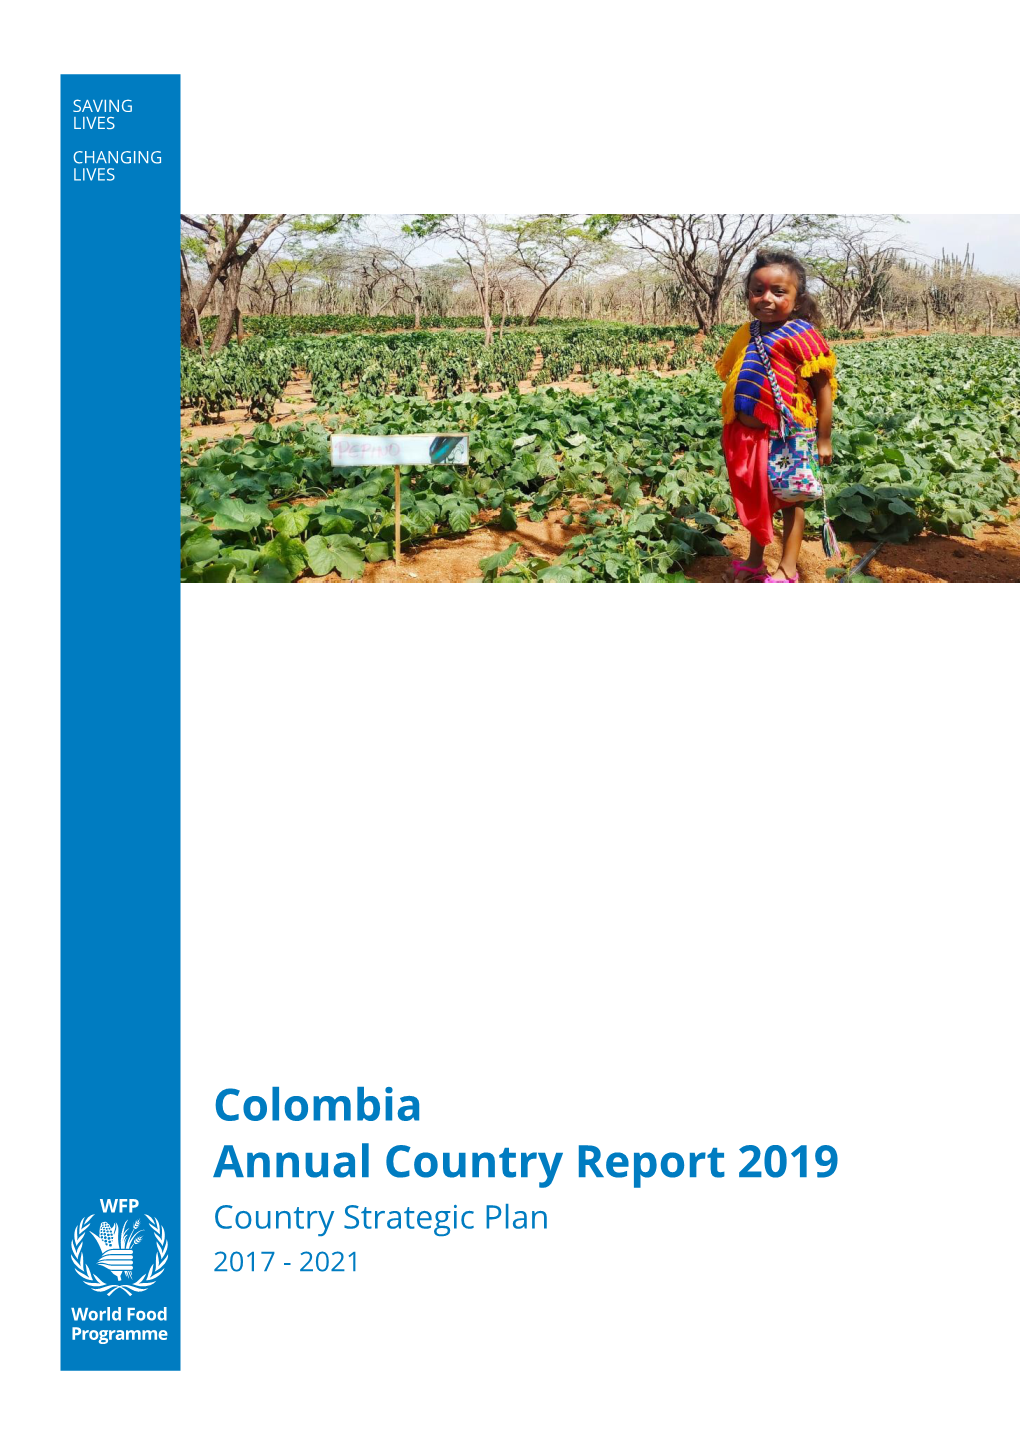 Colombia Annual Country Report 2019 Country Strategic Plan 2017 - 2021 Table of Contents